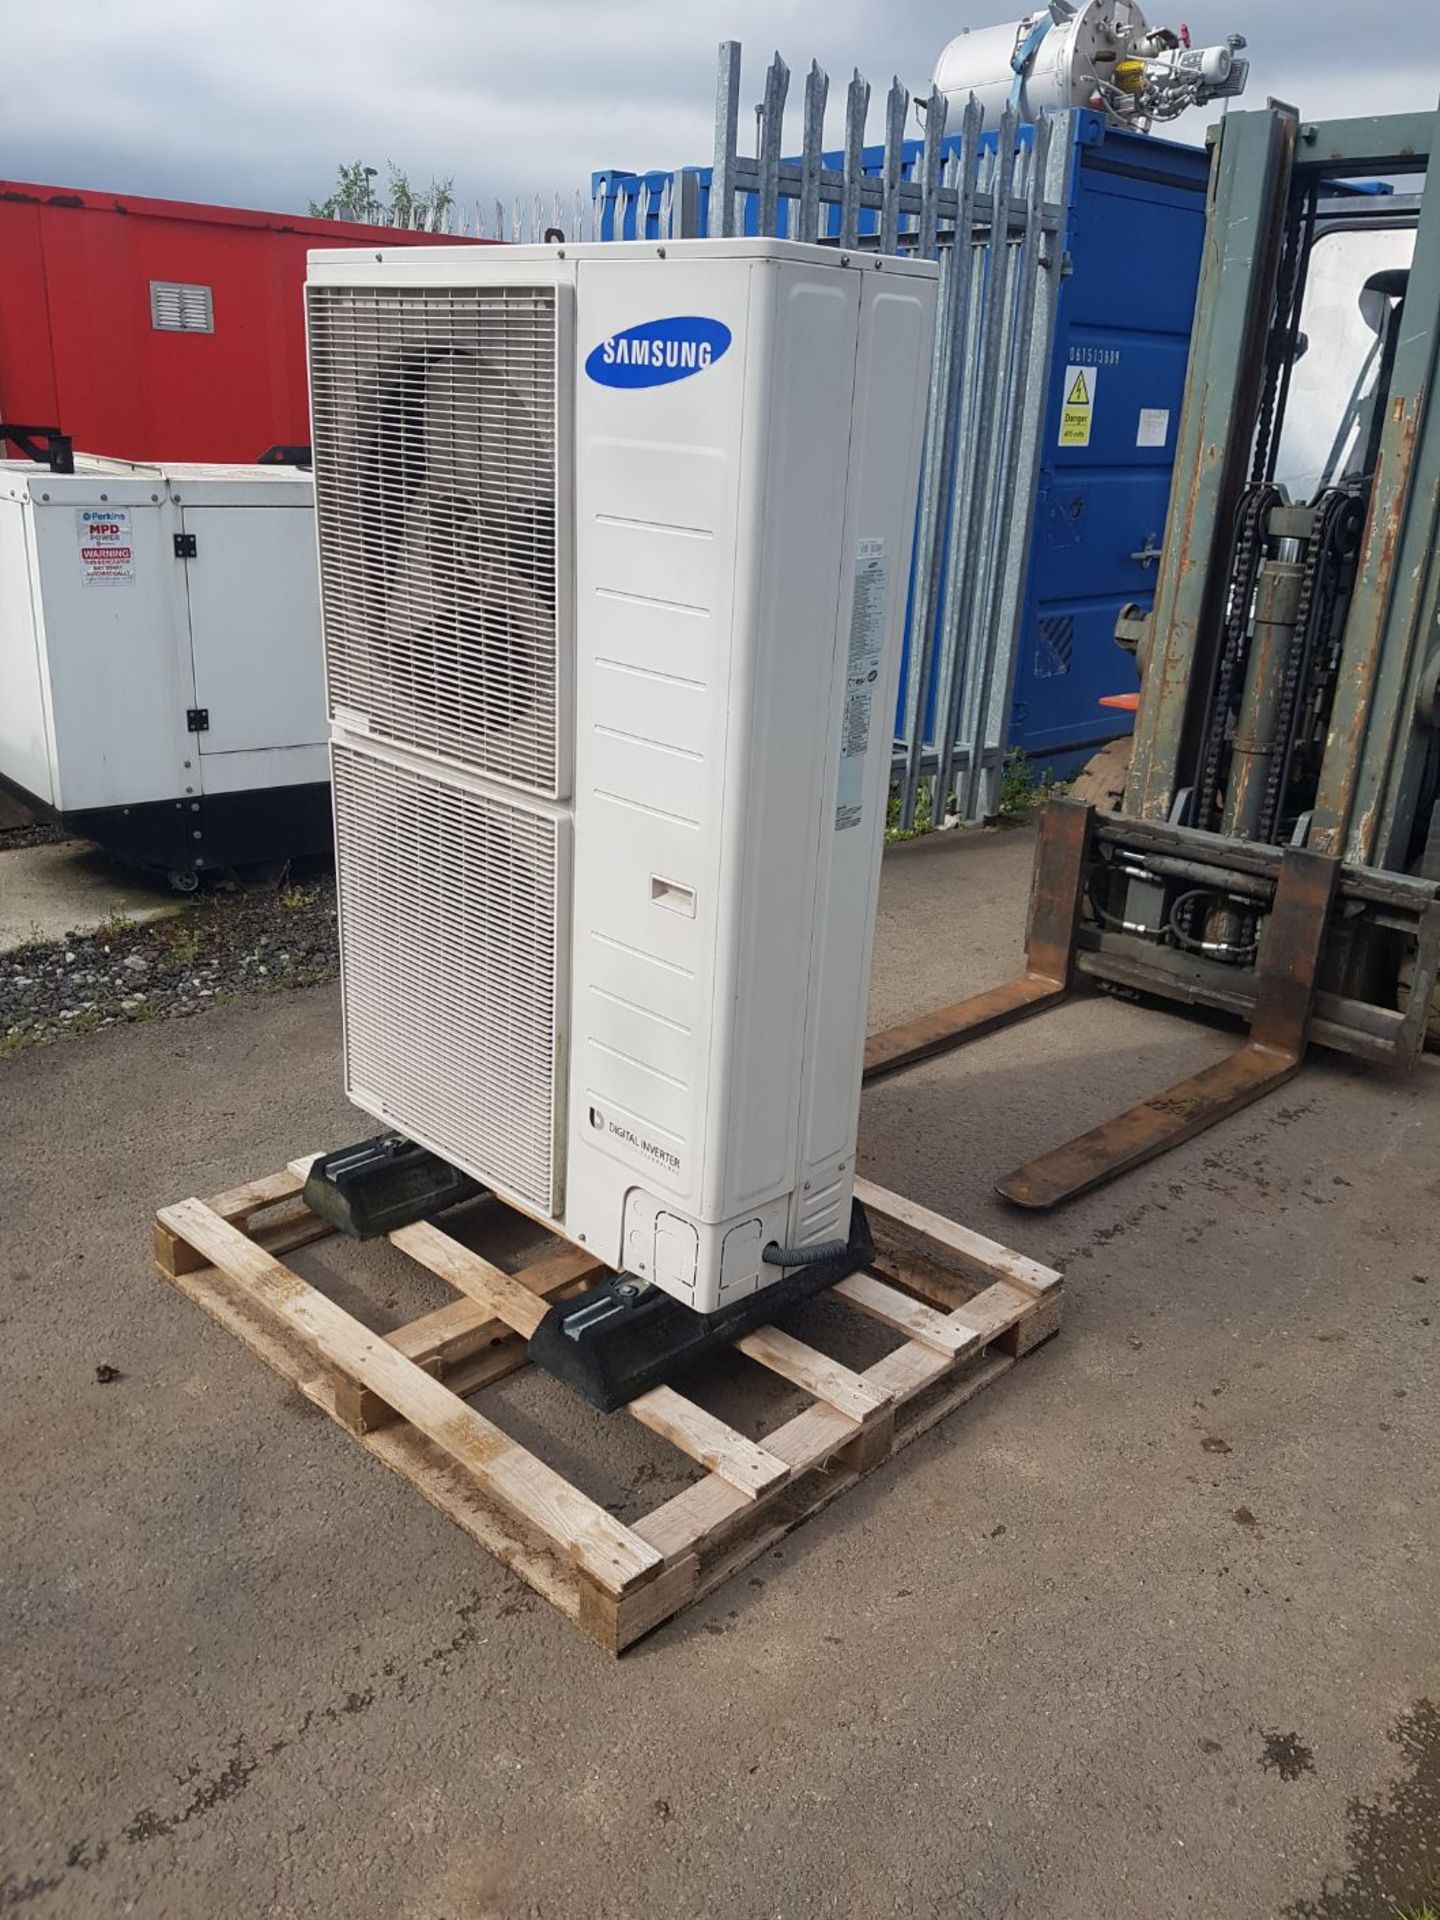 Samsung air to water heat pump - Image 7 of 7